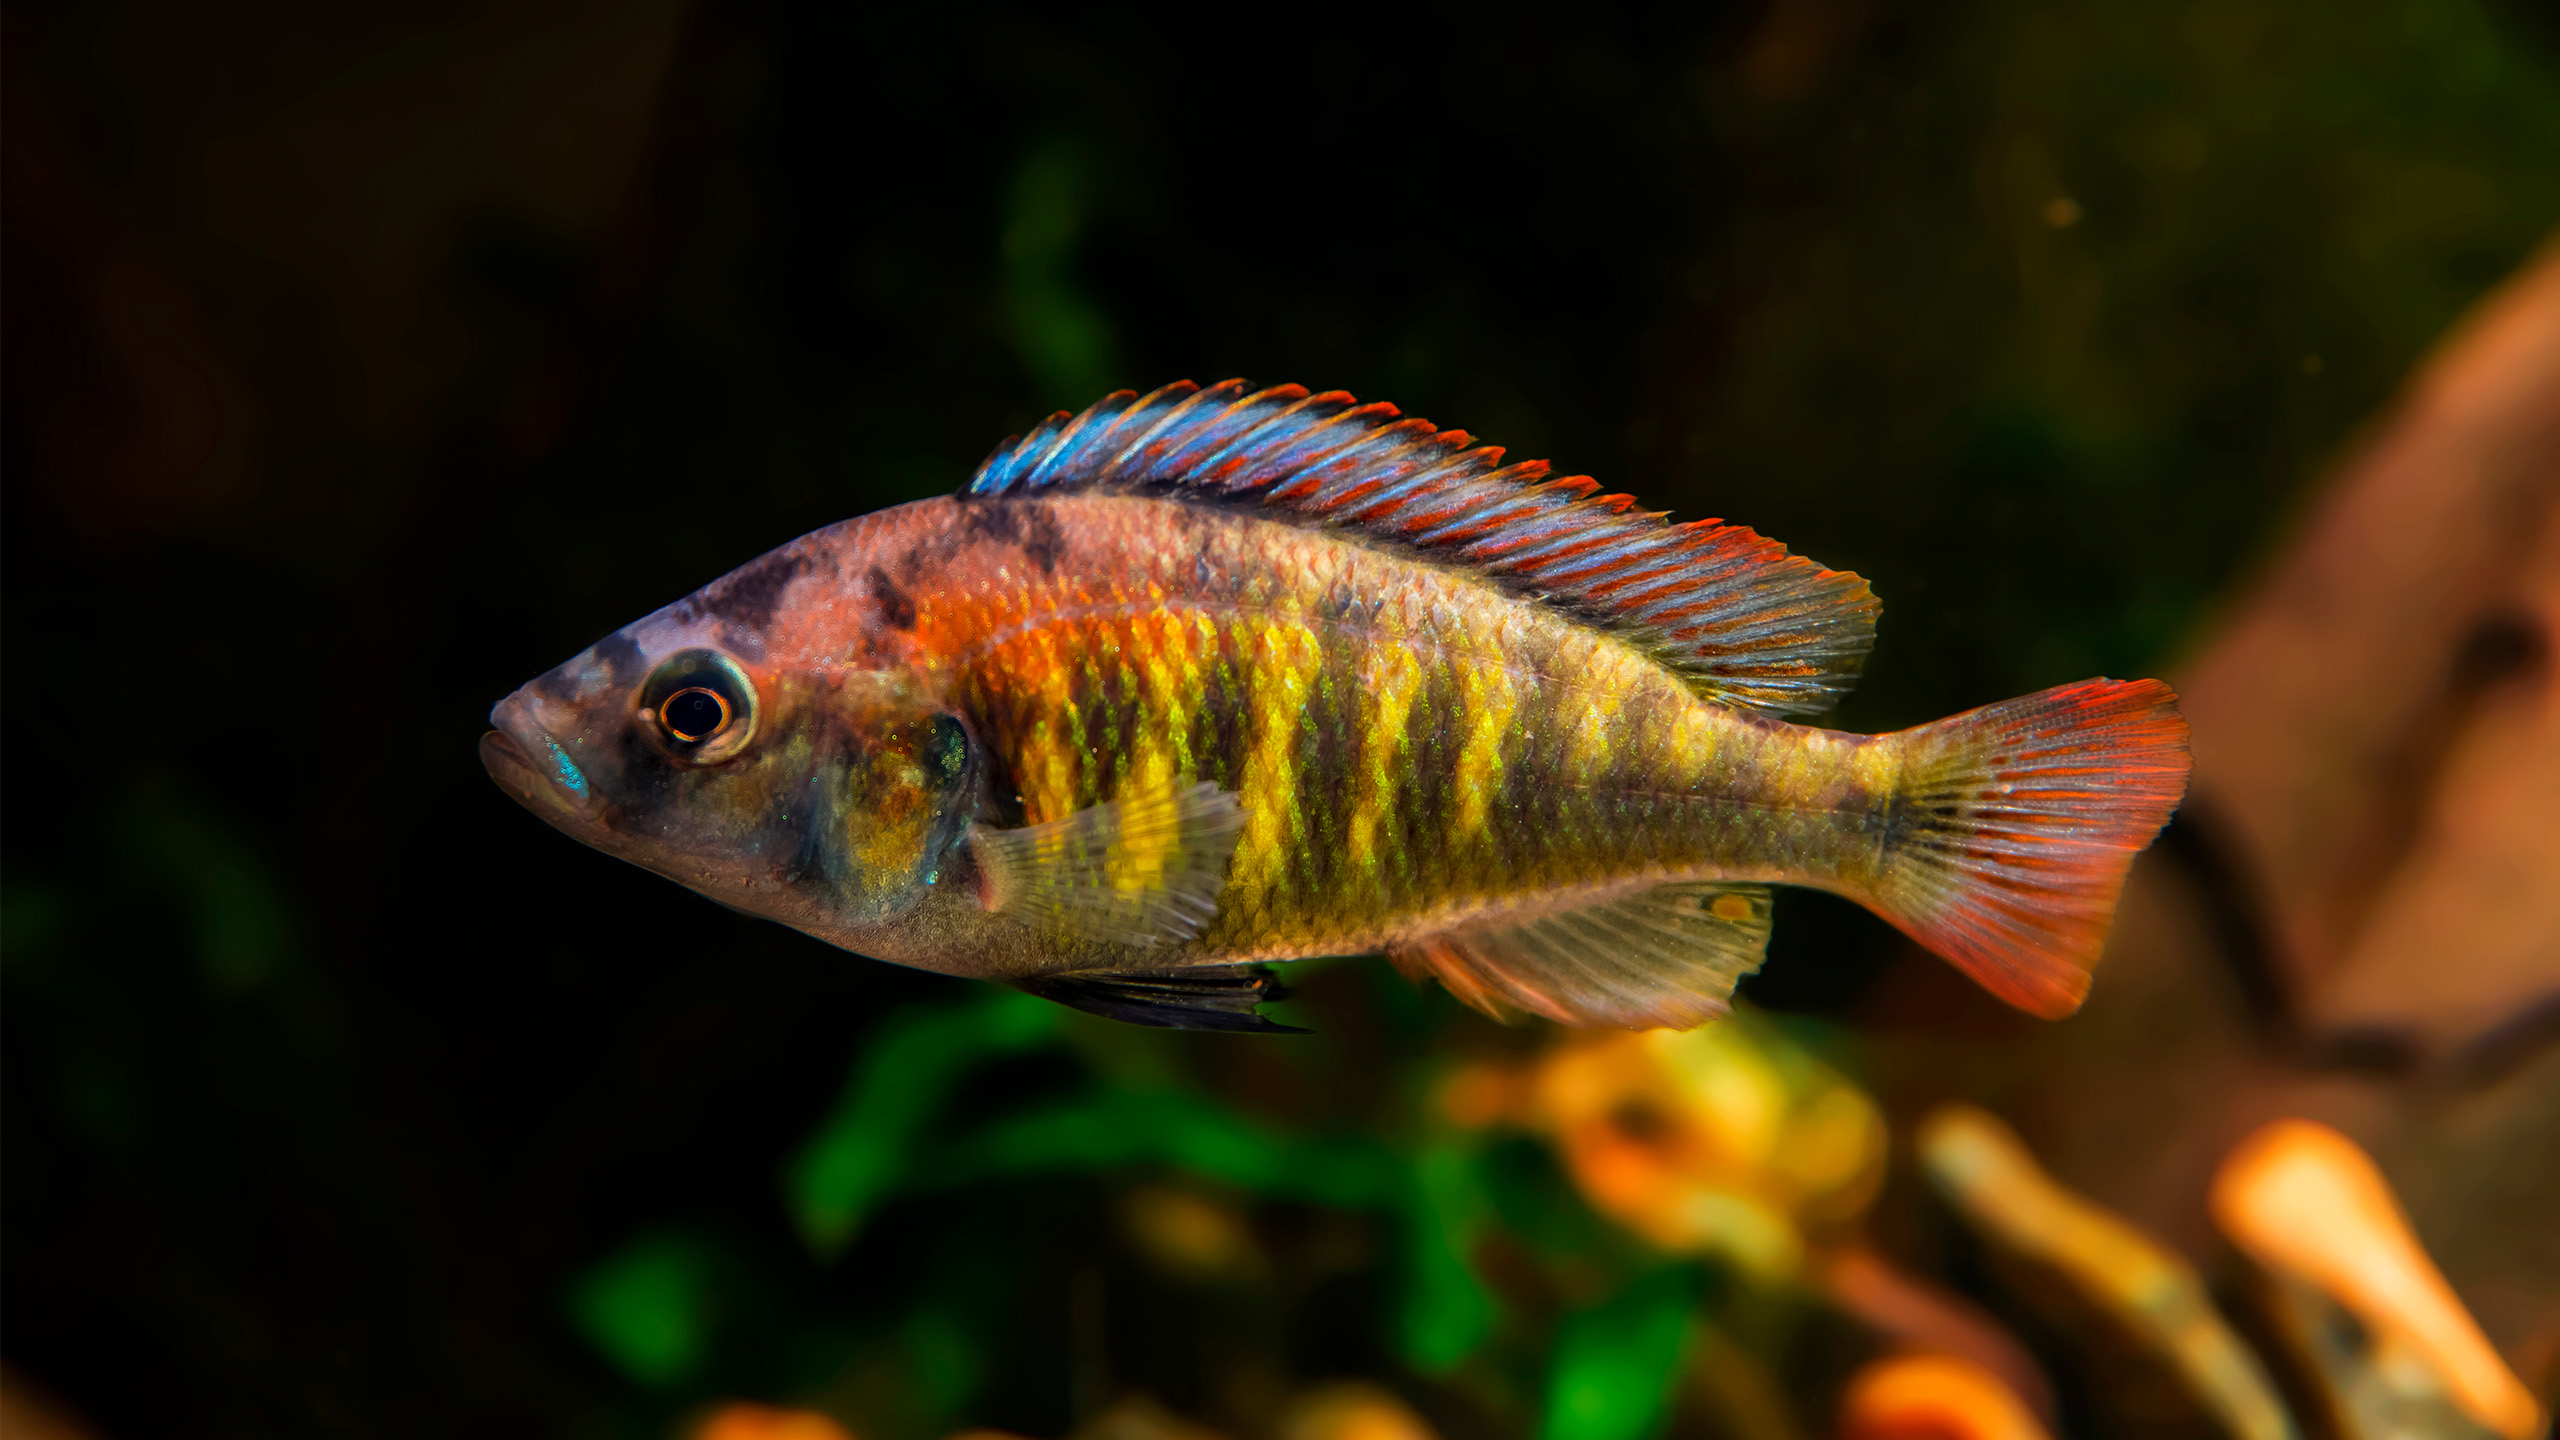 Haplochromis nyererei is a mouthbrooder from Lake Victoria. | Chonlasub Woravichan, Shutterstock